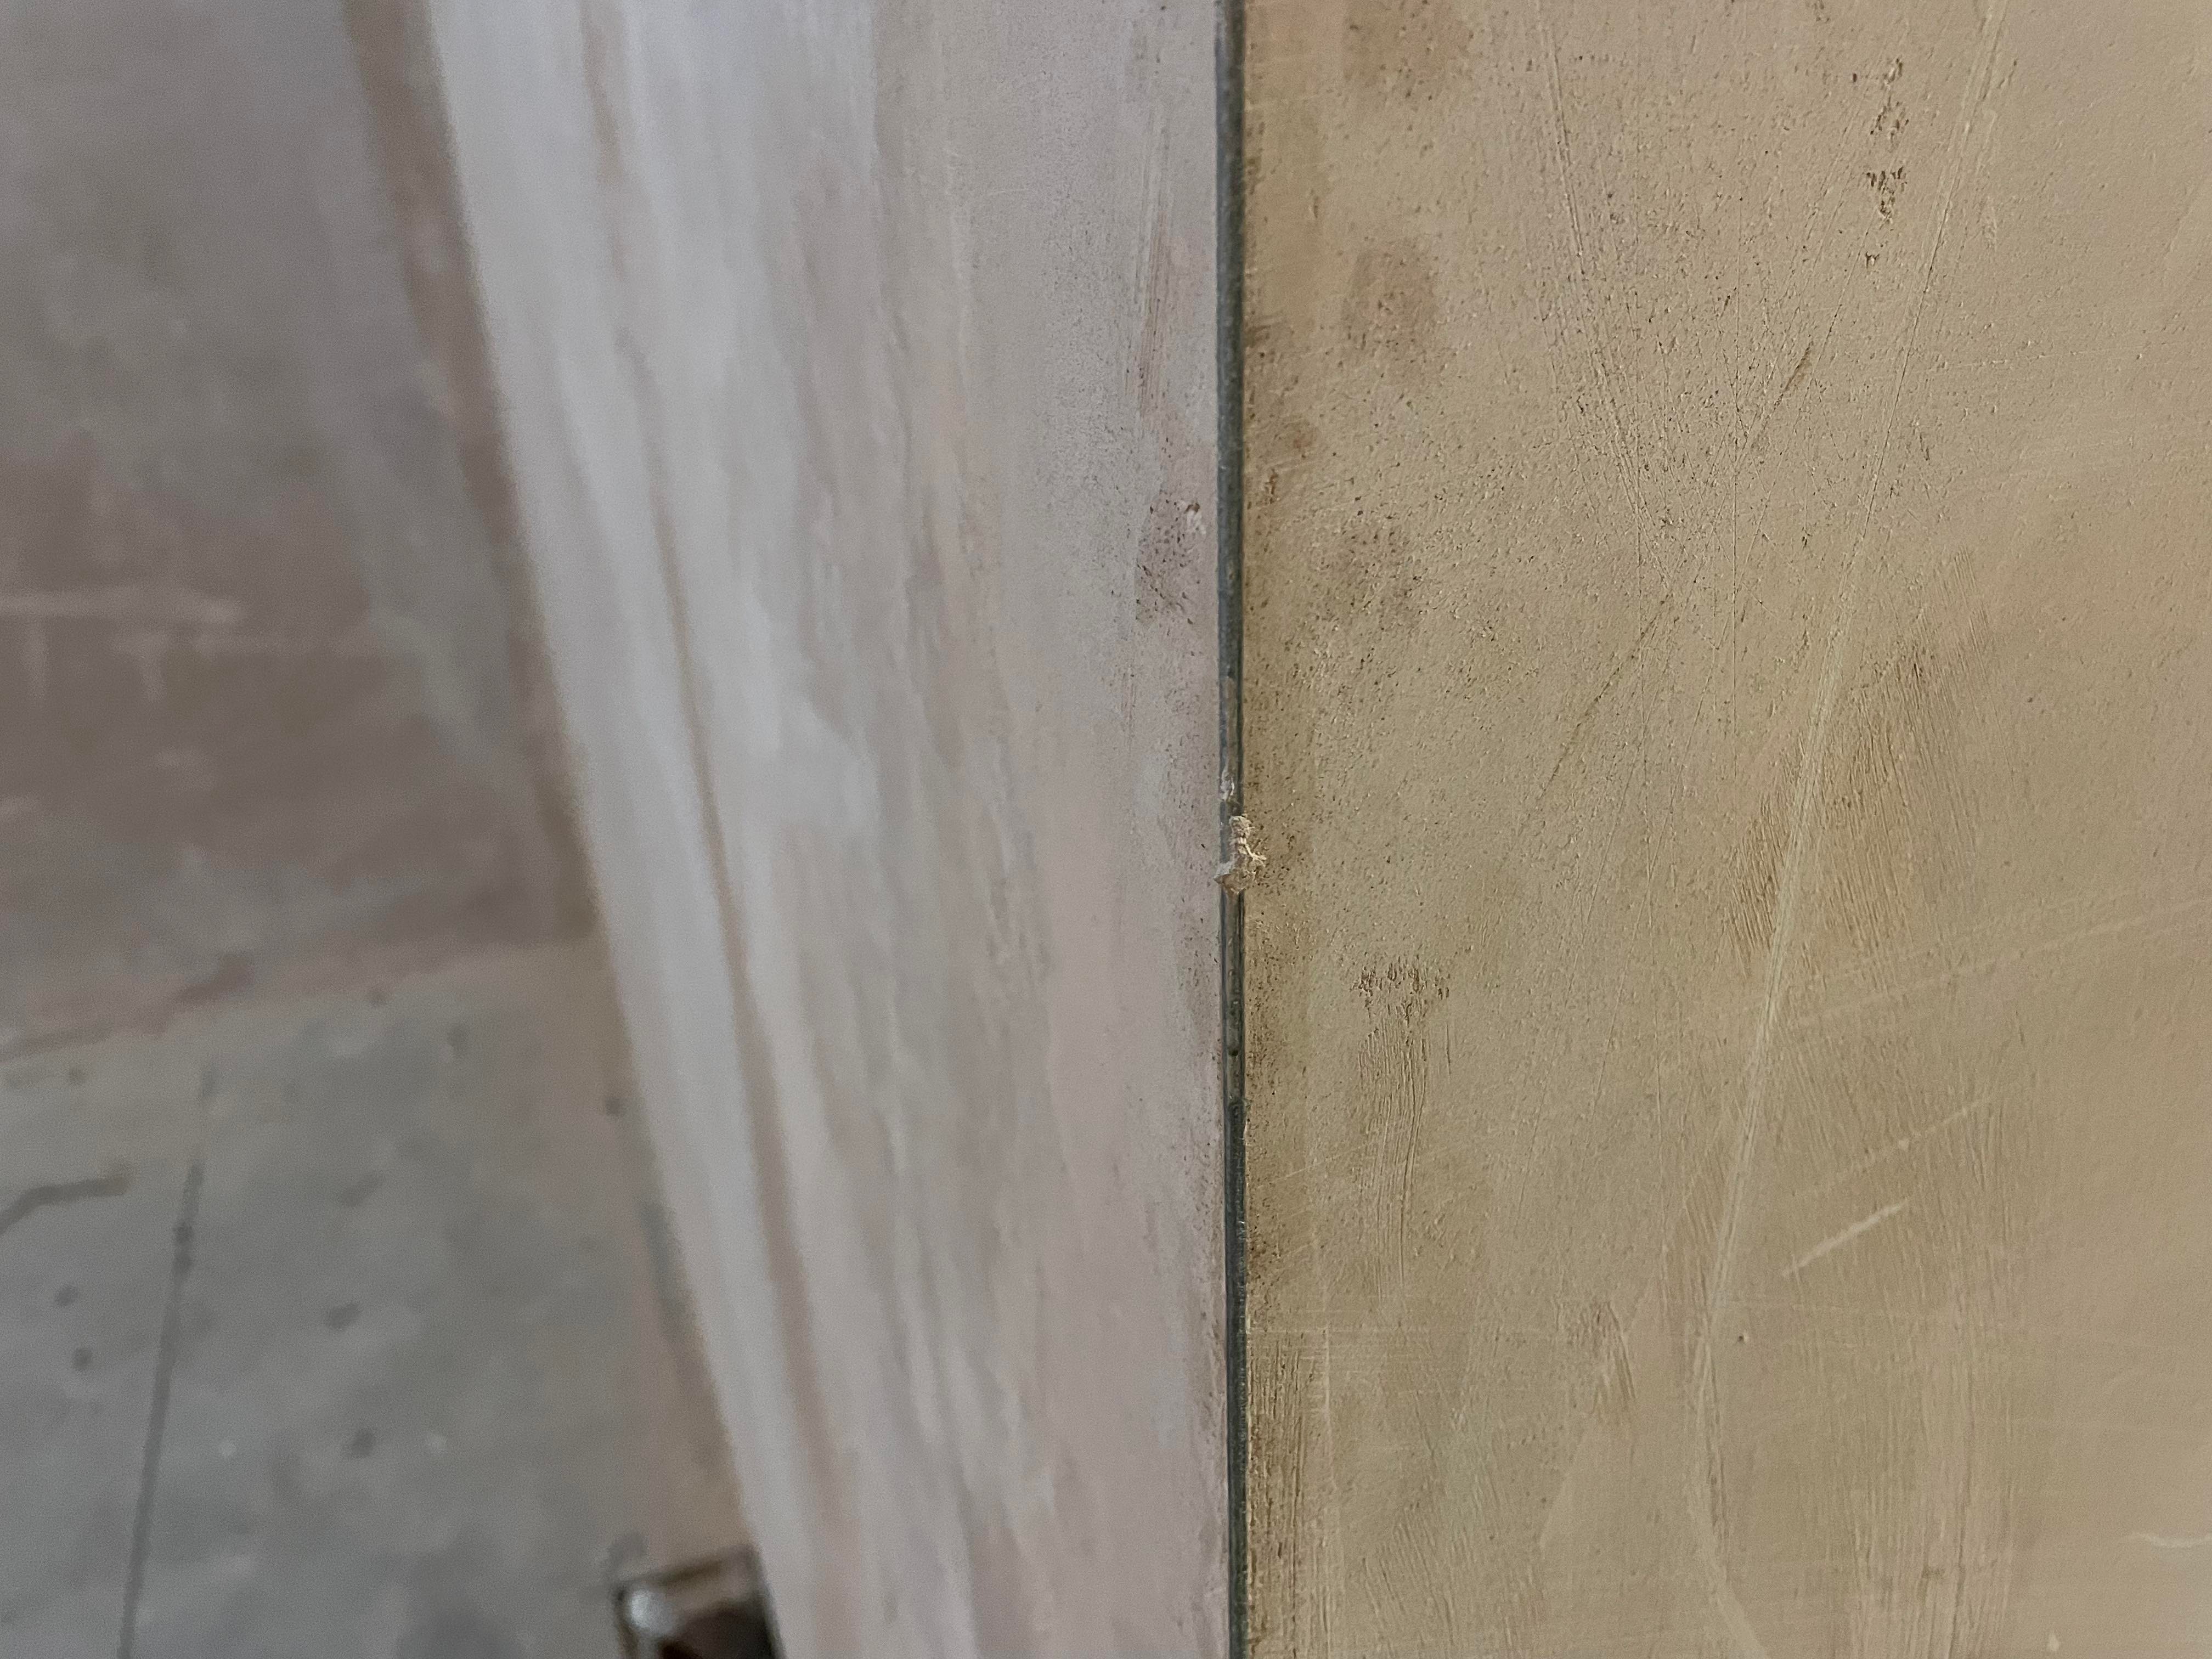 Is this good quality plastering? Am I being ripped off? Advice